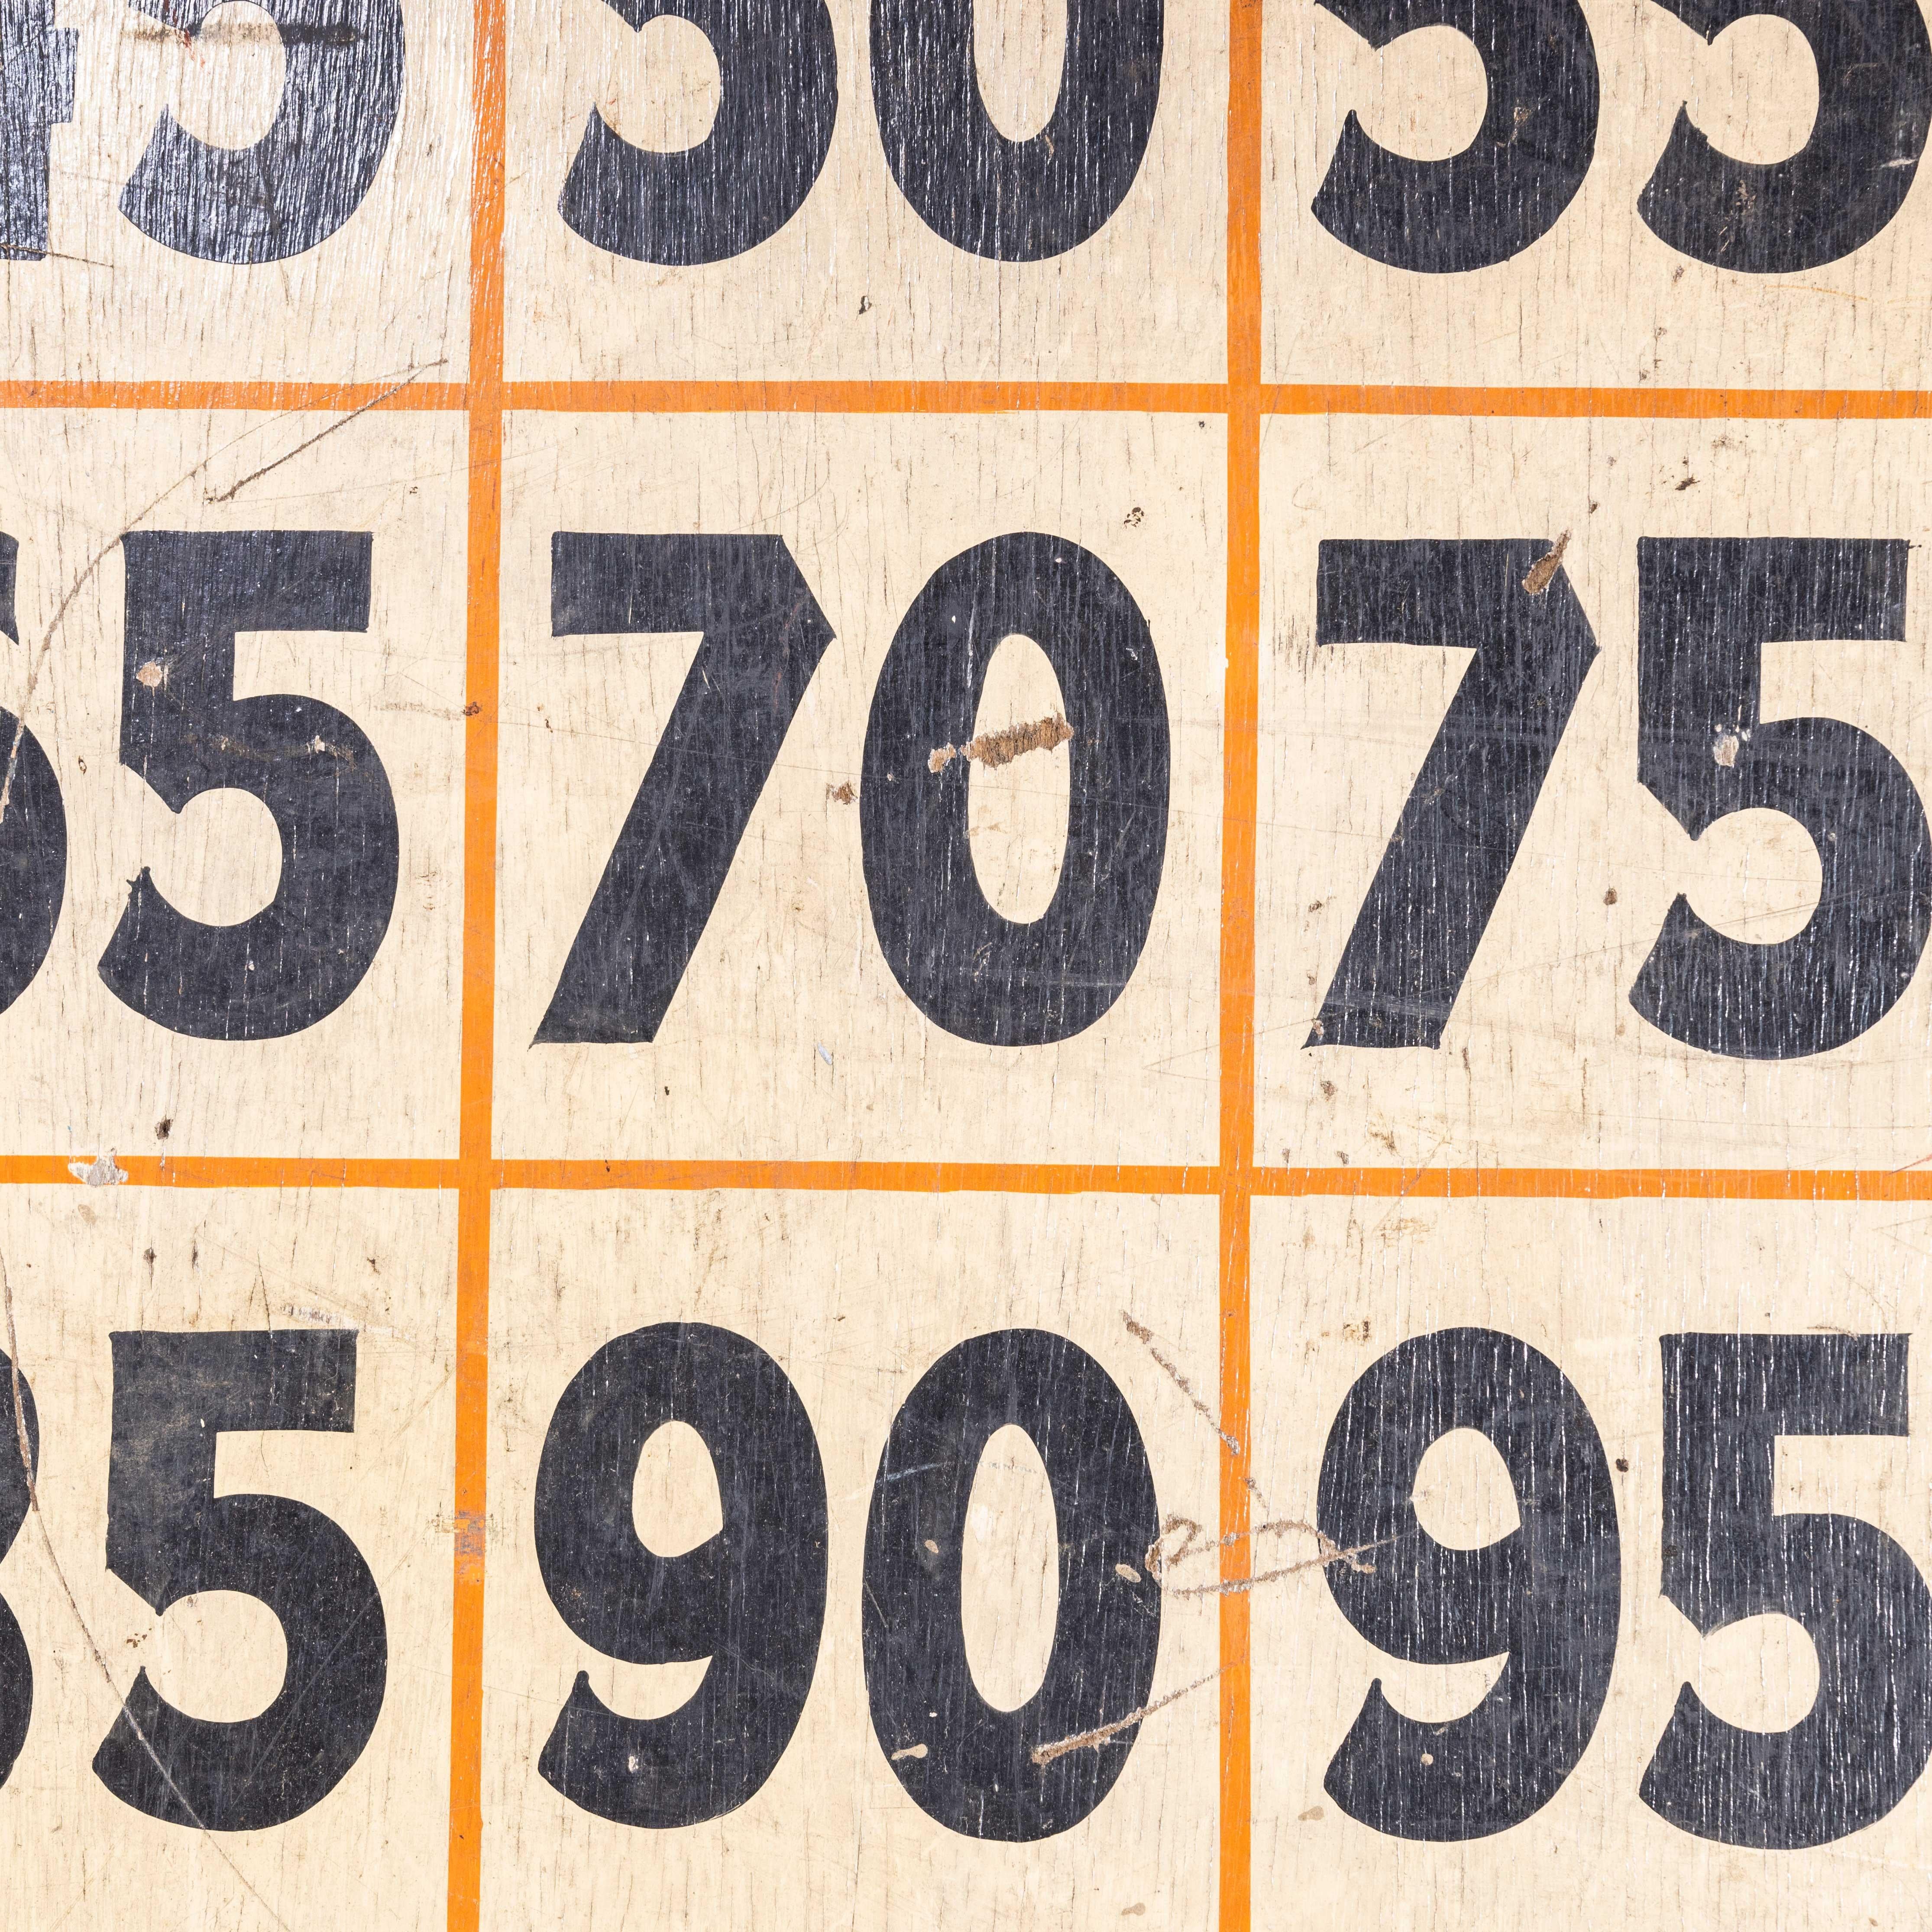 1950s Original Winning Numbers Large Fairground Sign – Odds
1950s Original Winning Numbers Large Fairground Sign – Odds. Lovely honest and original fairground sign mounted on wooden board and hand painted.

WORKSHOP REPORT
Our workshop team